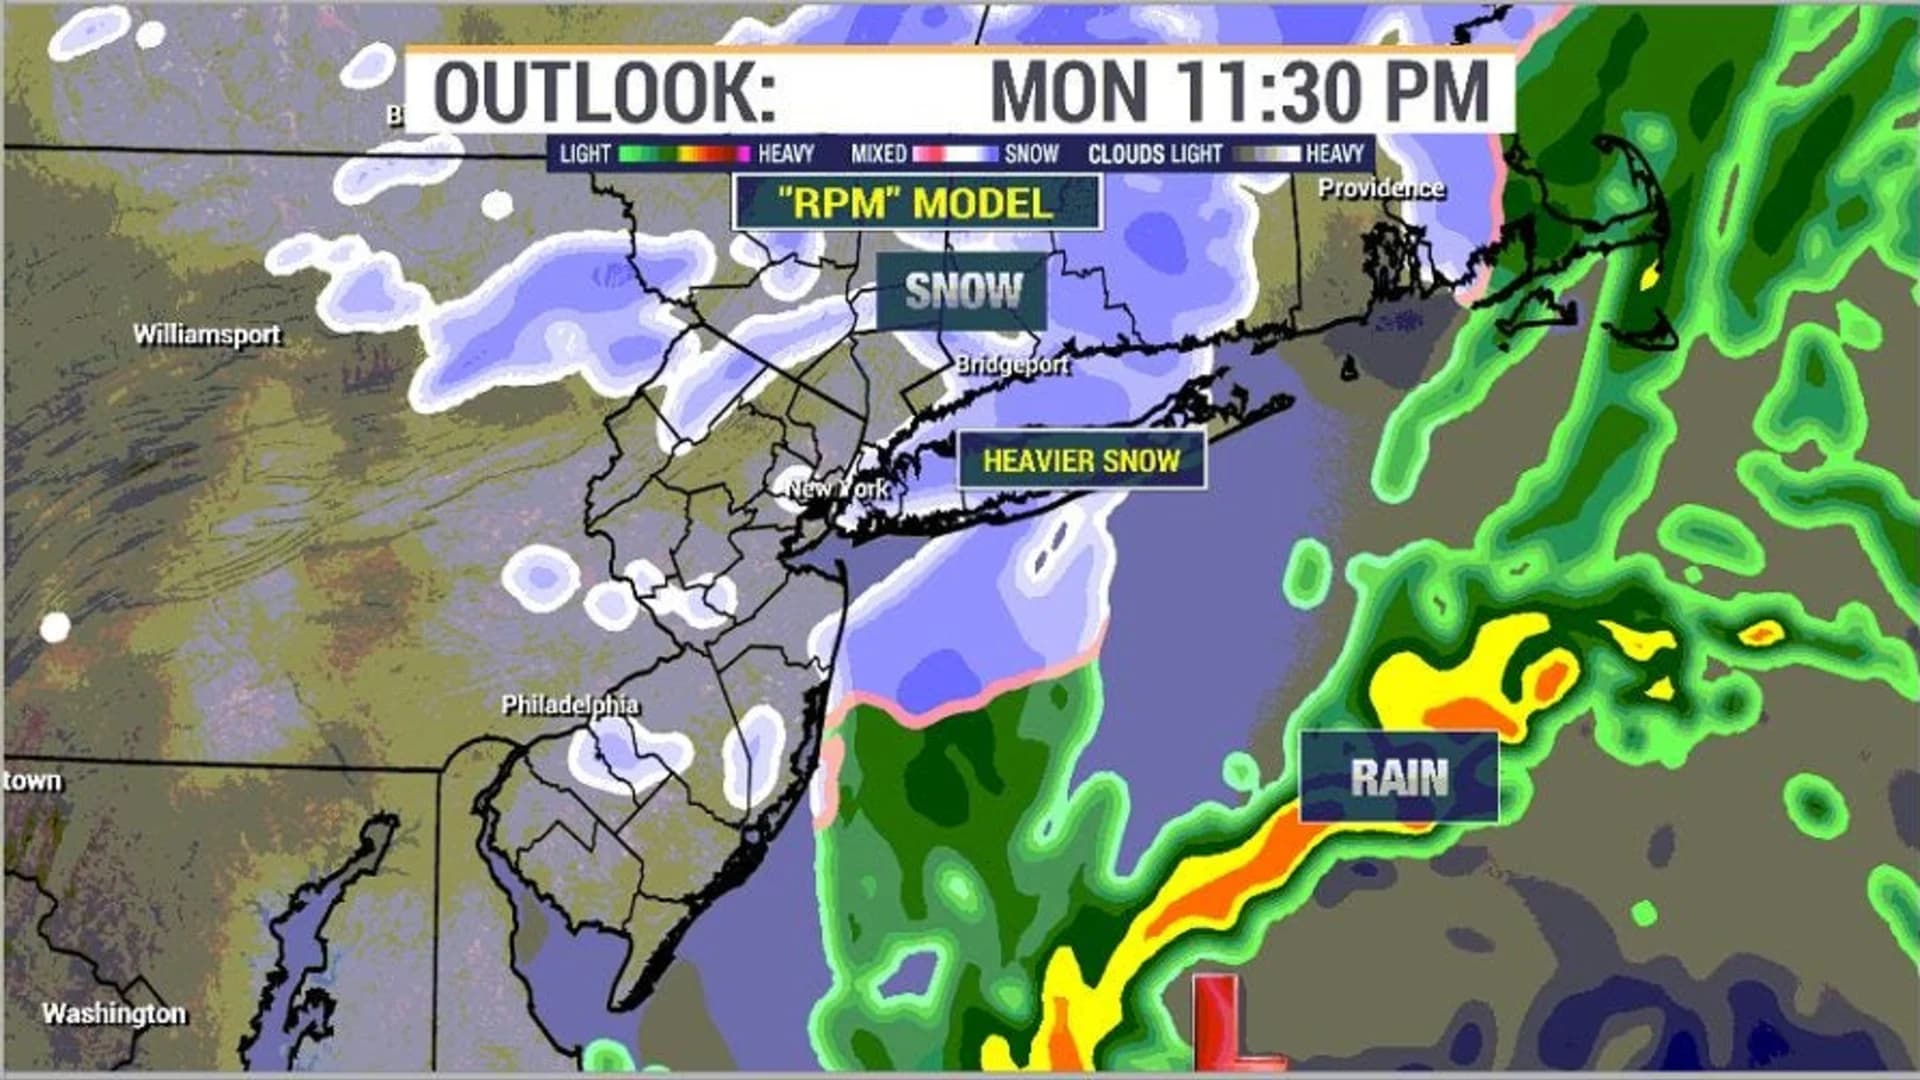 Storm brings wintry mix to LI with up to 6 inches of snow possible